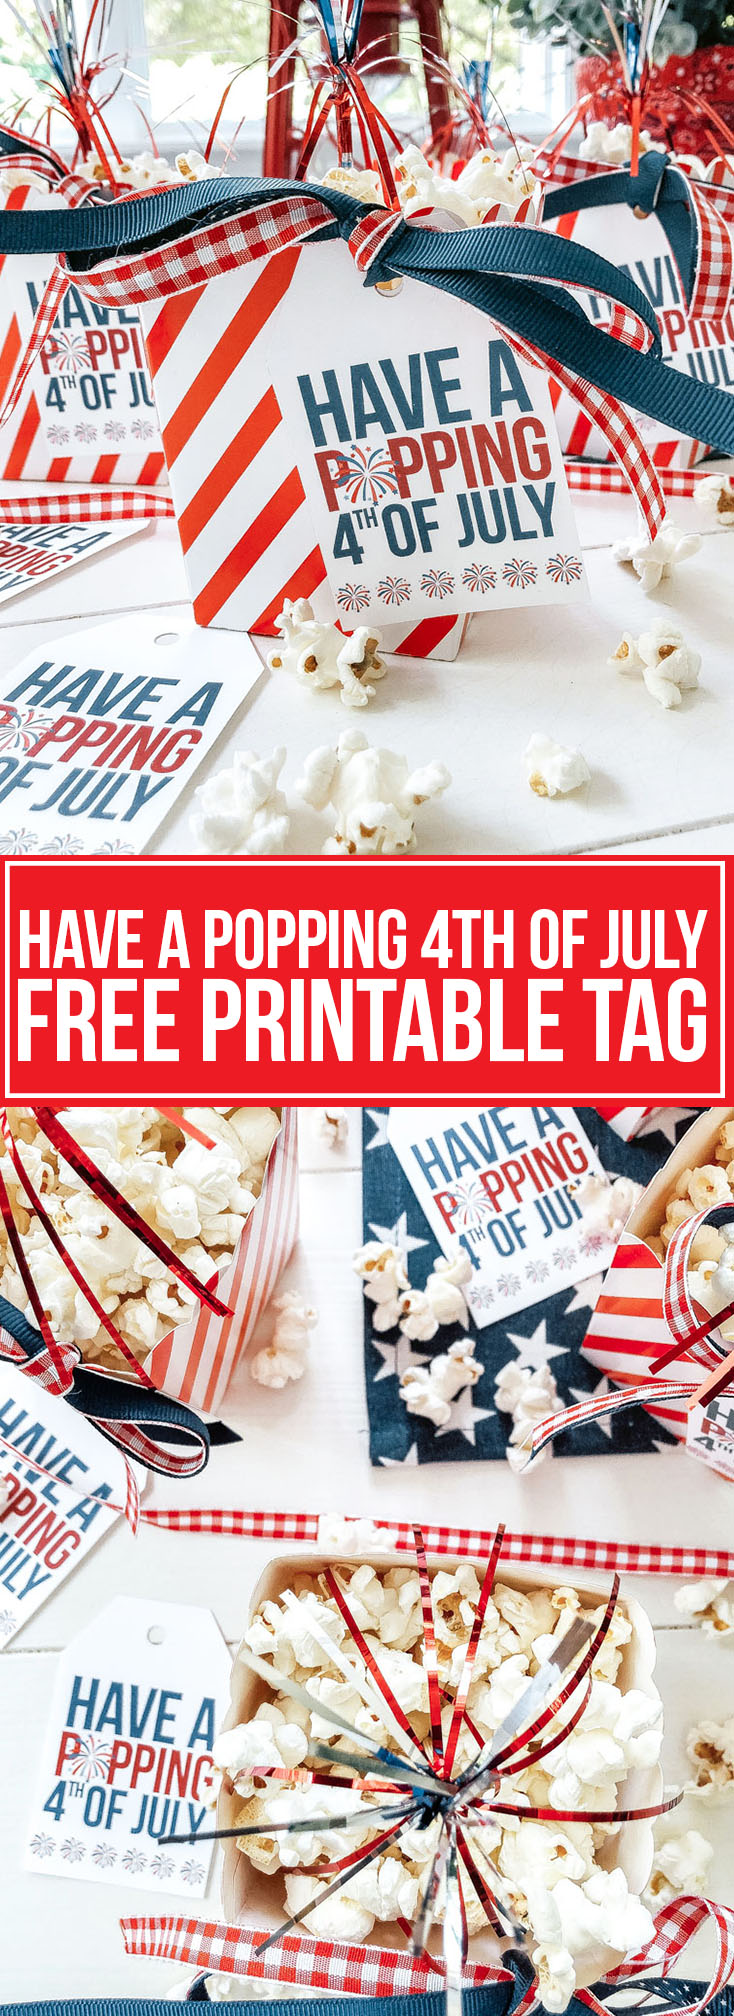 4TH OF JULY POPCORN TAGS (FREE PRINTABLE)